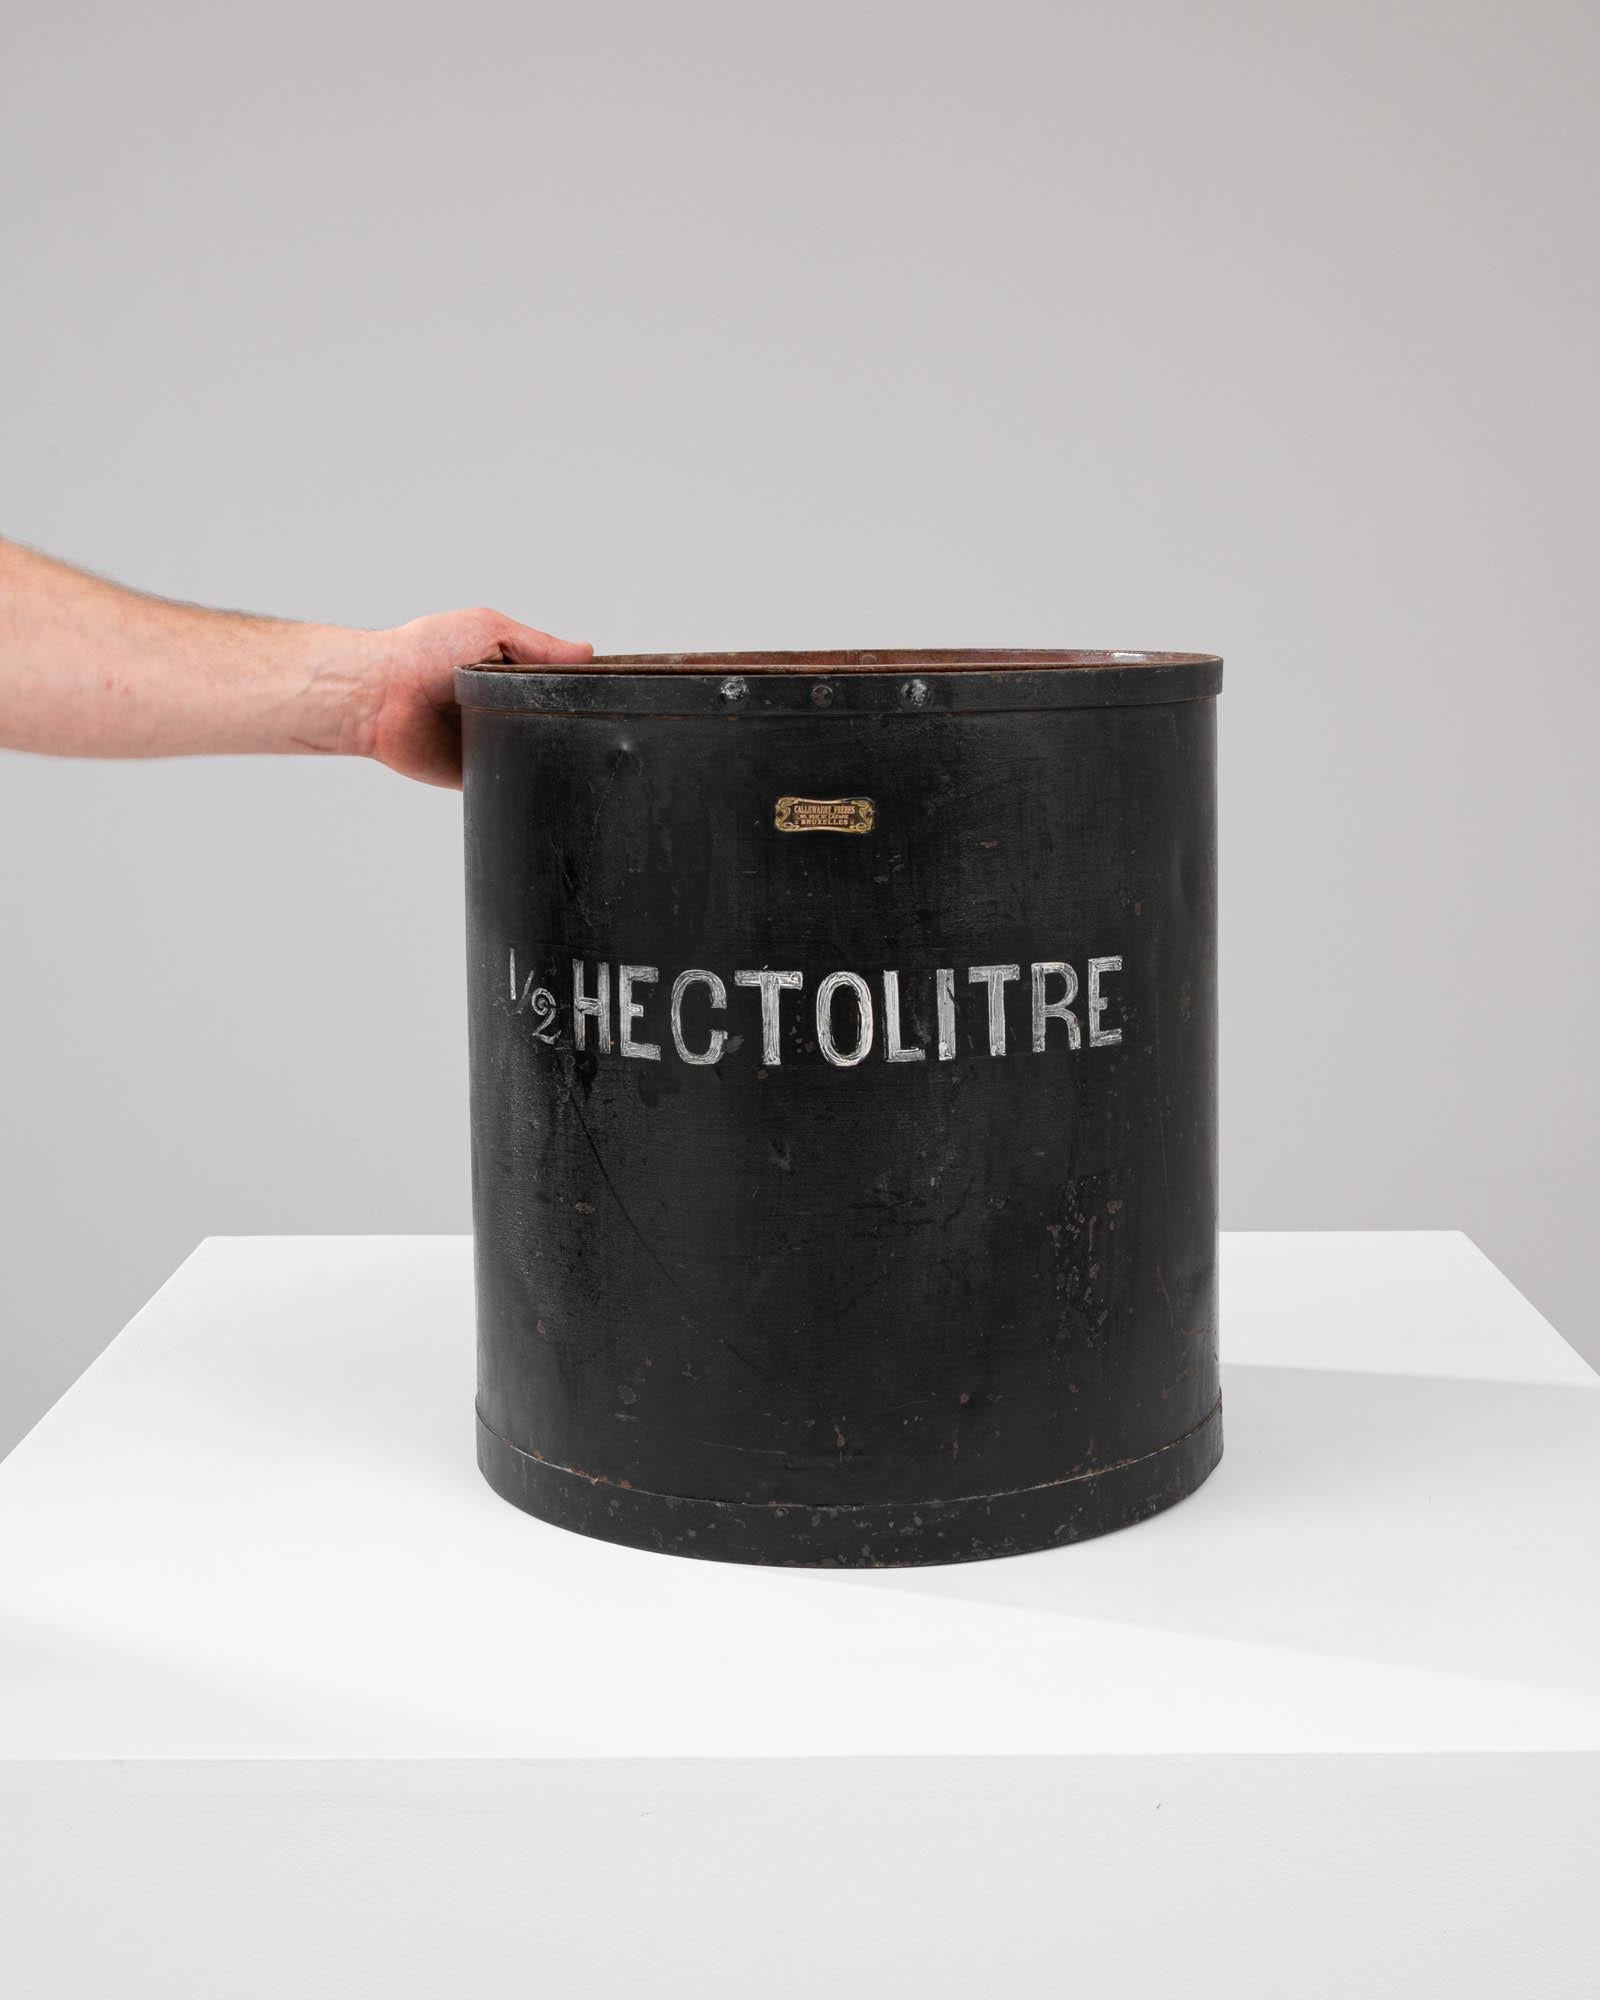 Discover a piece of history with this authentic Early 20th Century Metal Measure, a testament to the storied past of craftsmanship and trade. With a capacity of 1/2 hectolitre, this sturdy container was once a standard in measuring goods, and it